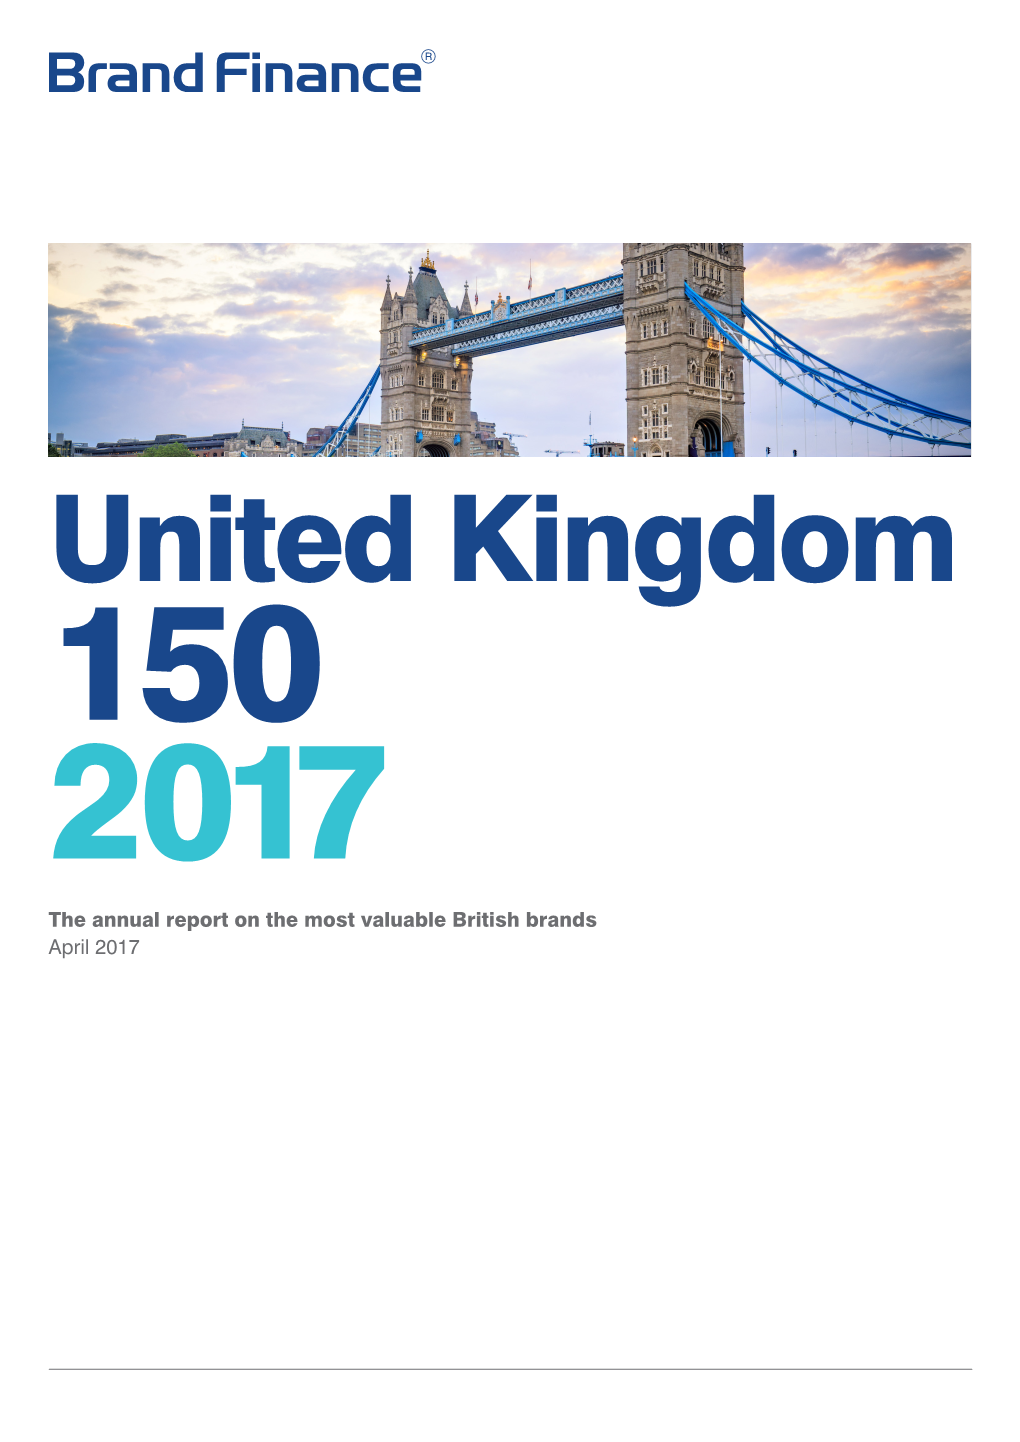 The Annual Report on the Most Valuable British Brands April 2017